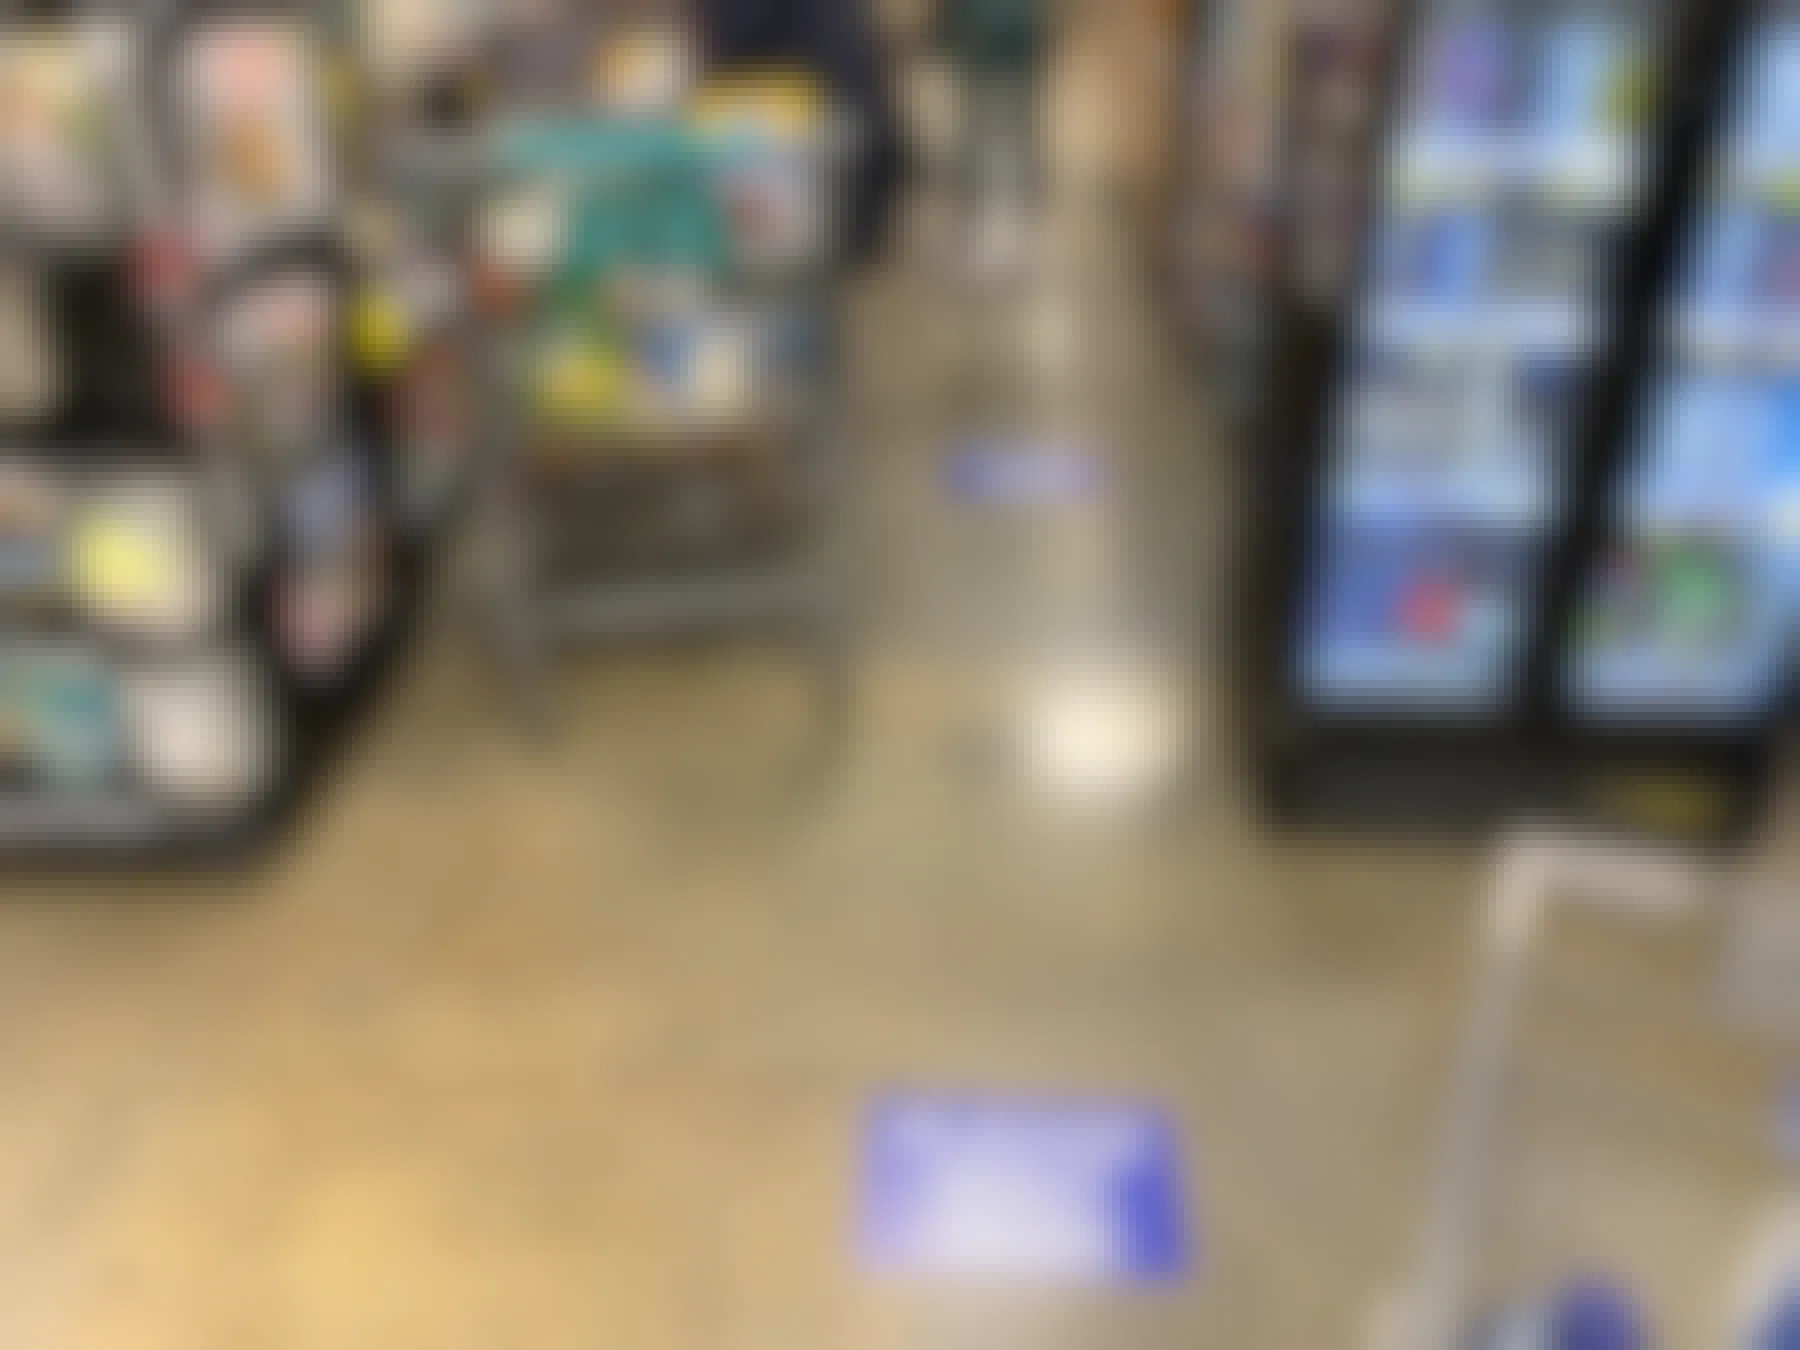 A checkout line with people shopping, standing near markers on the floor that say, "Please Wait here